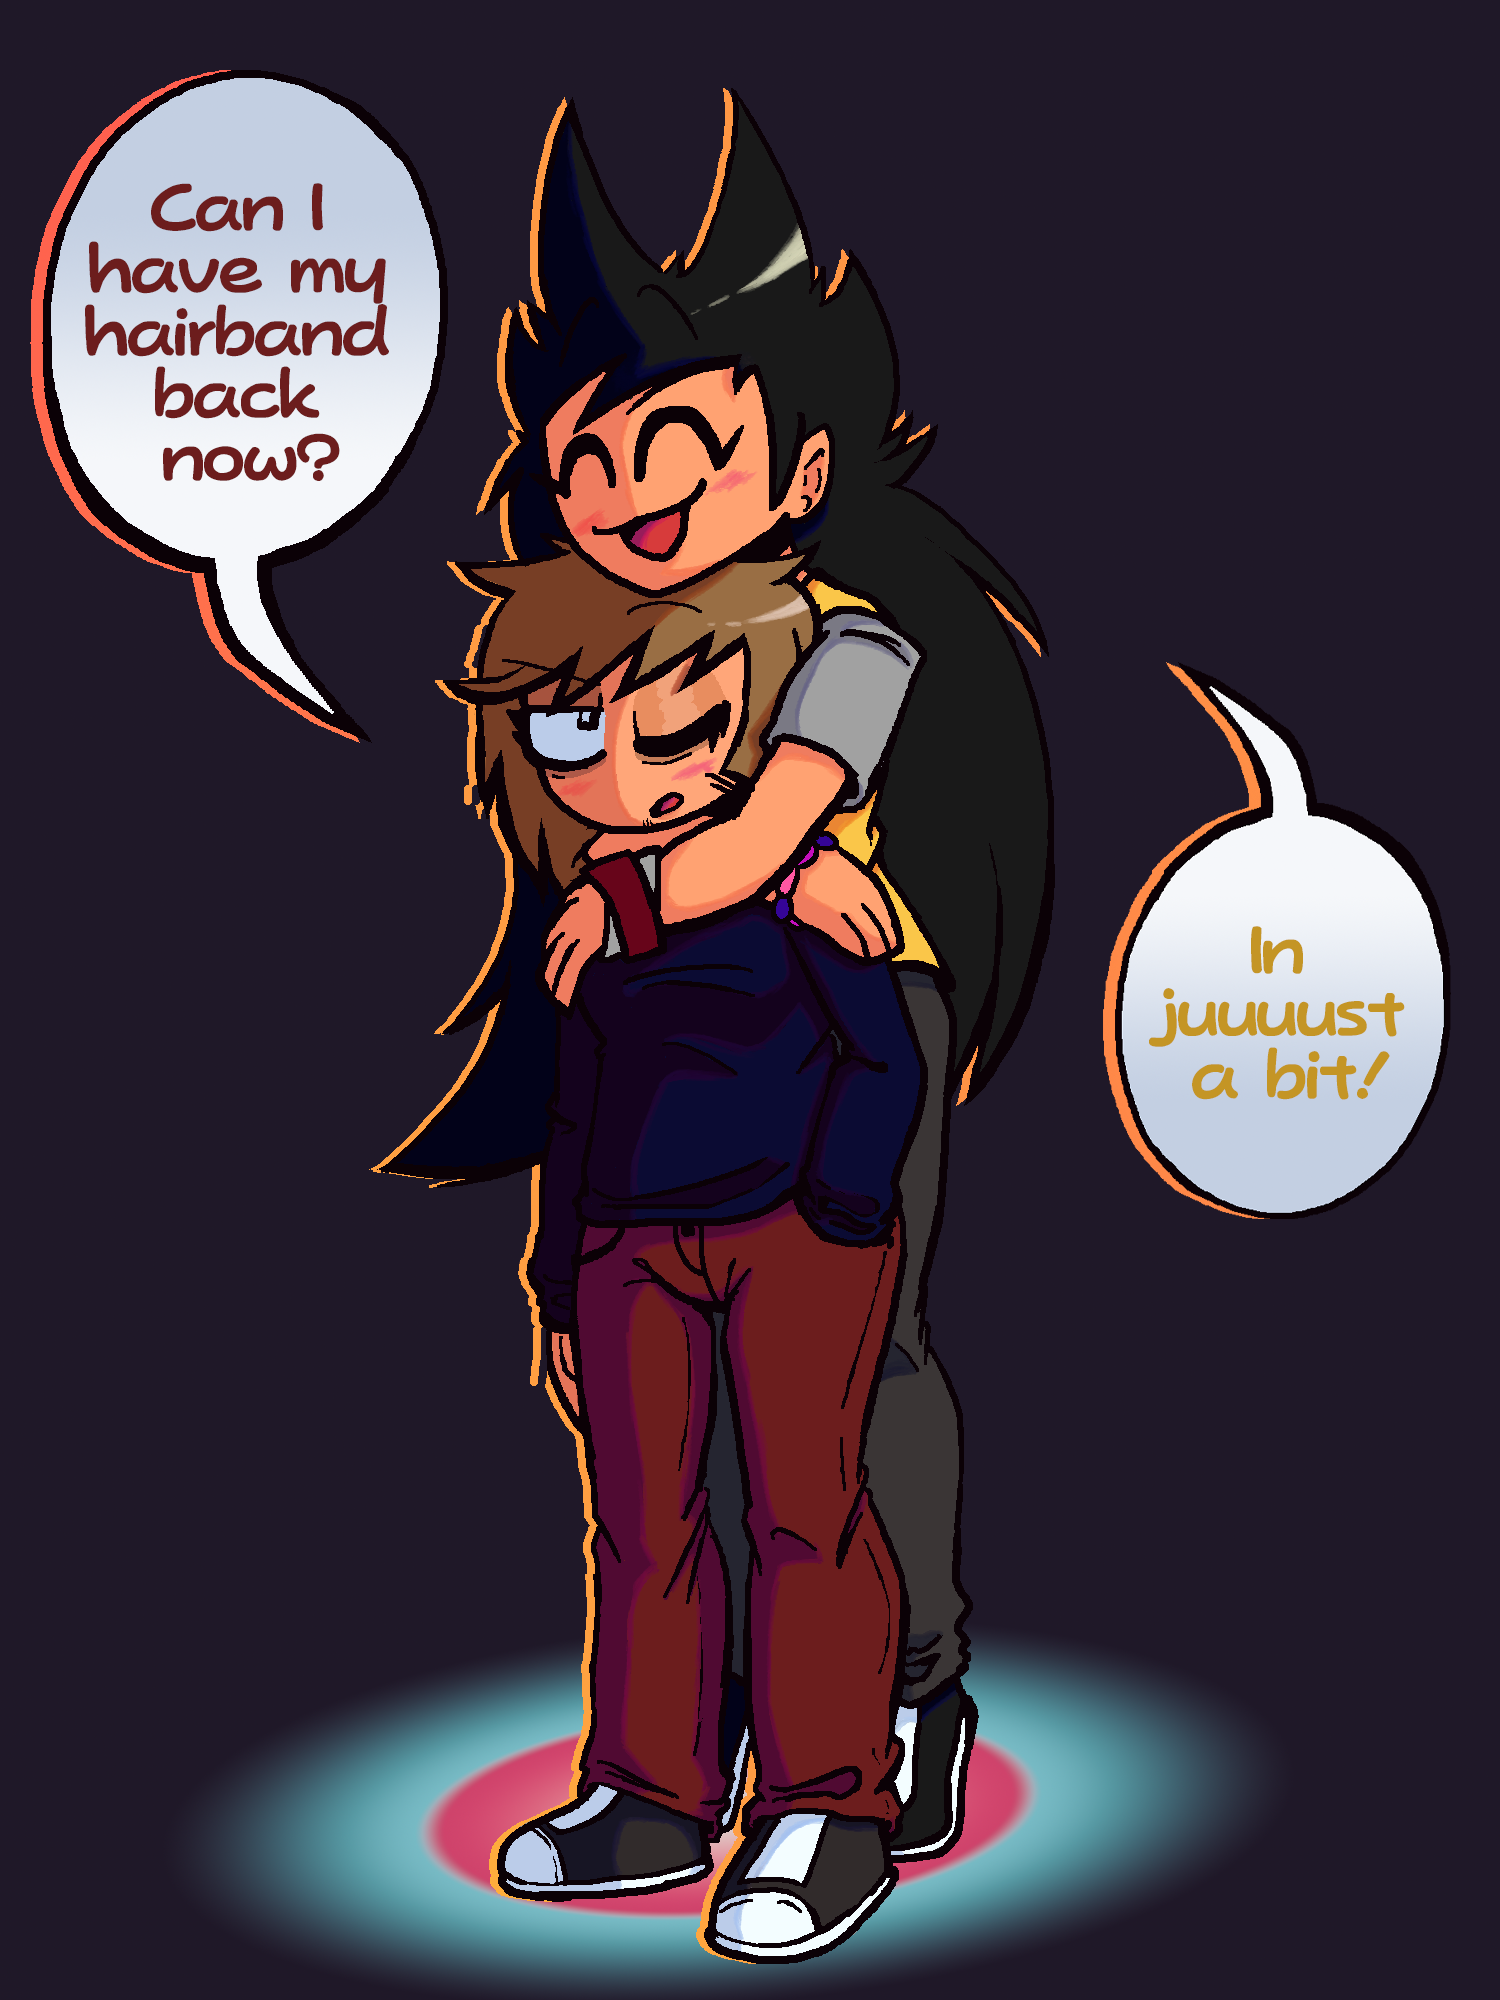 an illustration of dani and coy, genderbent versions of dan and coy from roommates (yes coy has the same name, i'm not very creative lol). dani is hugging coy with her head rested on top of coy's. coy has her hair down. dialogue reads as such. coy: can i have my hairband back now? dani: in juuust a bit!